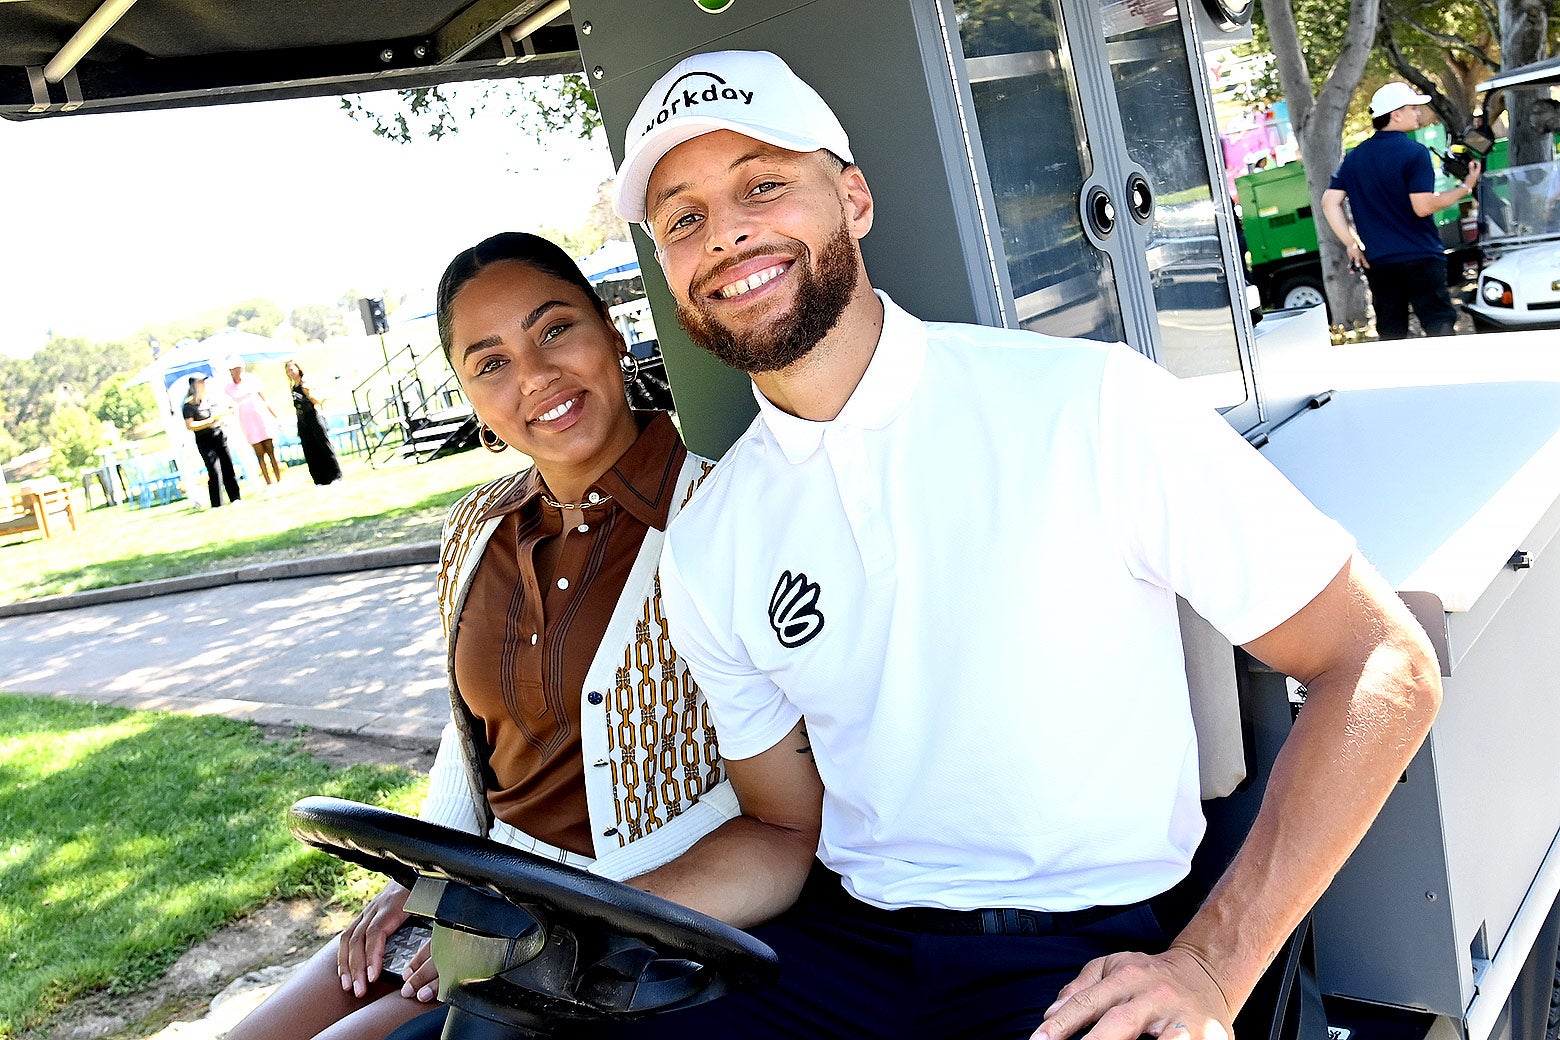 Steph and Ayesha Curry smiling in a golf cart.